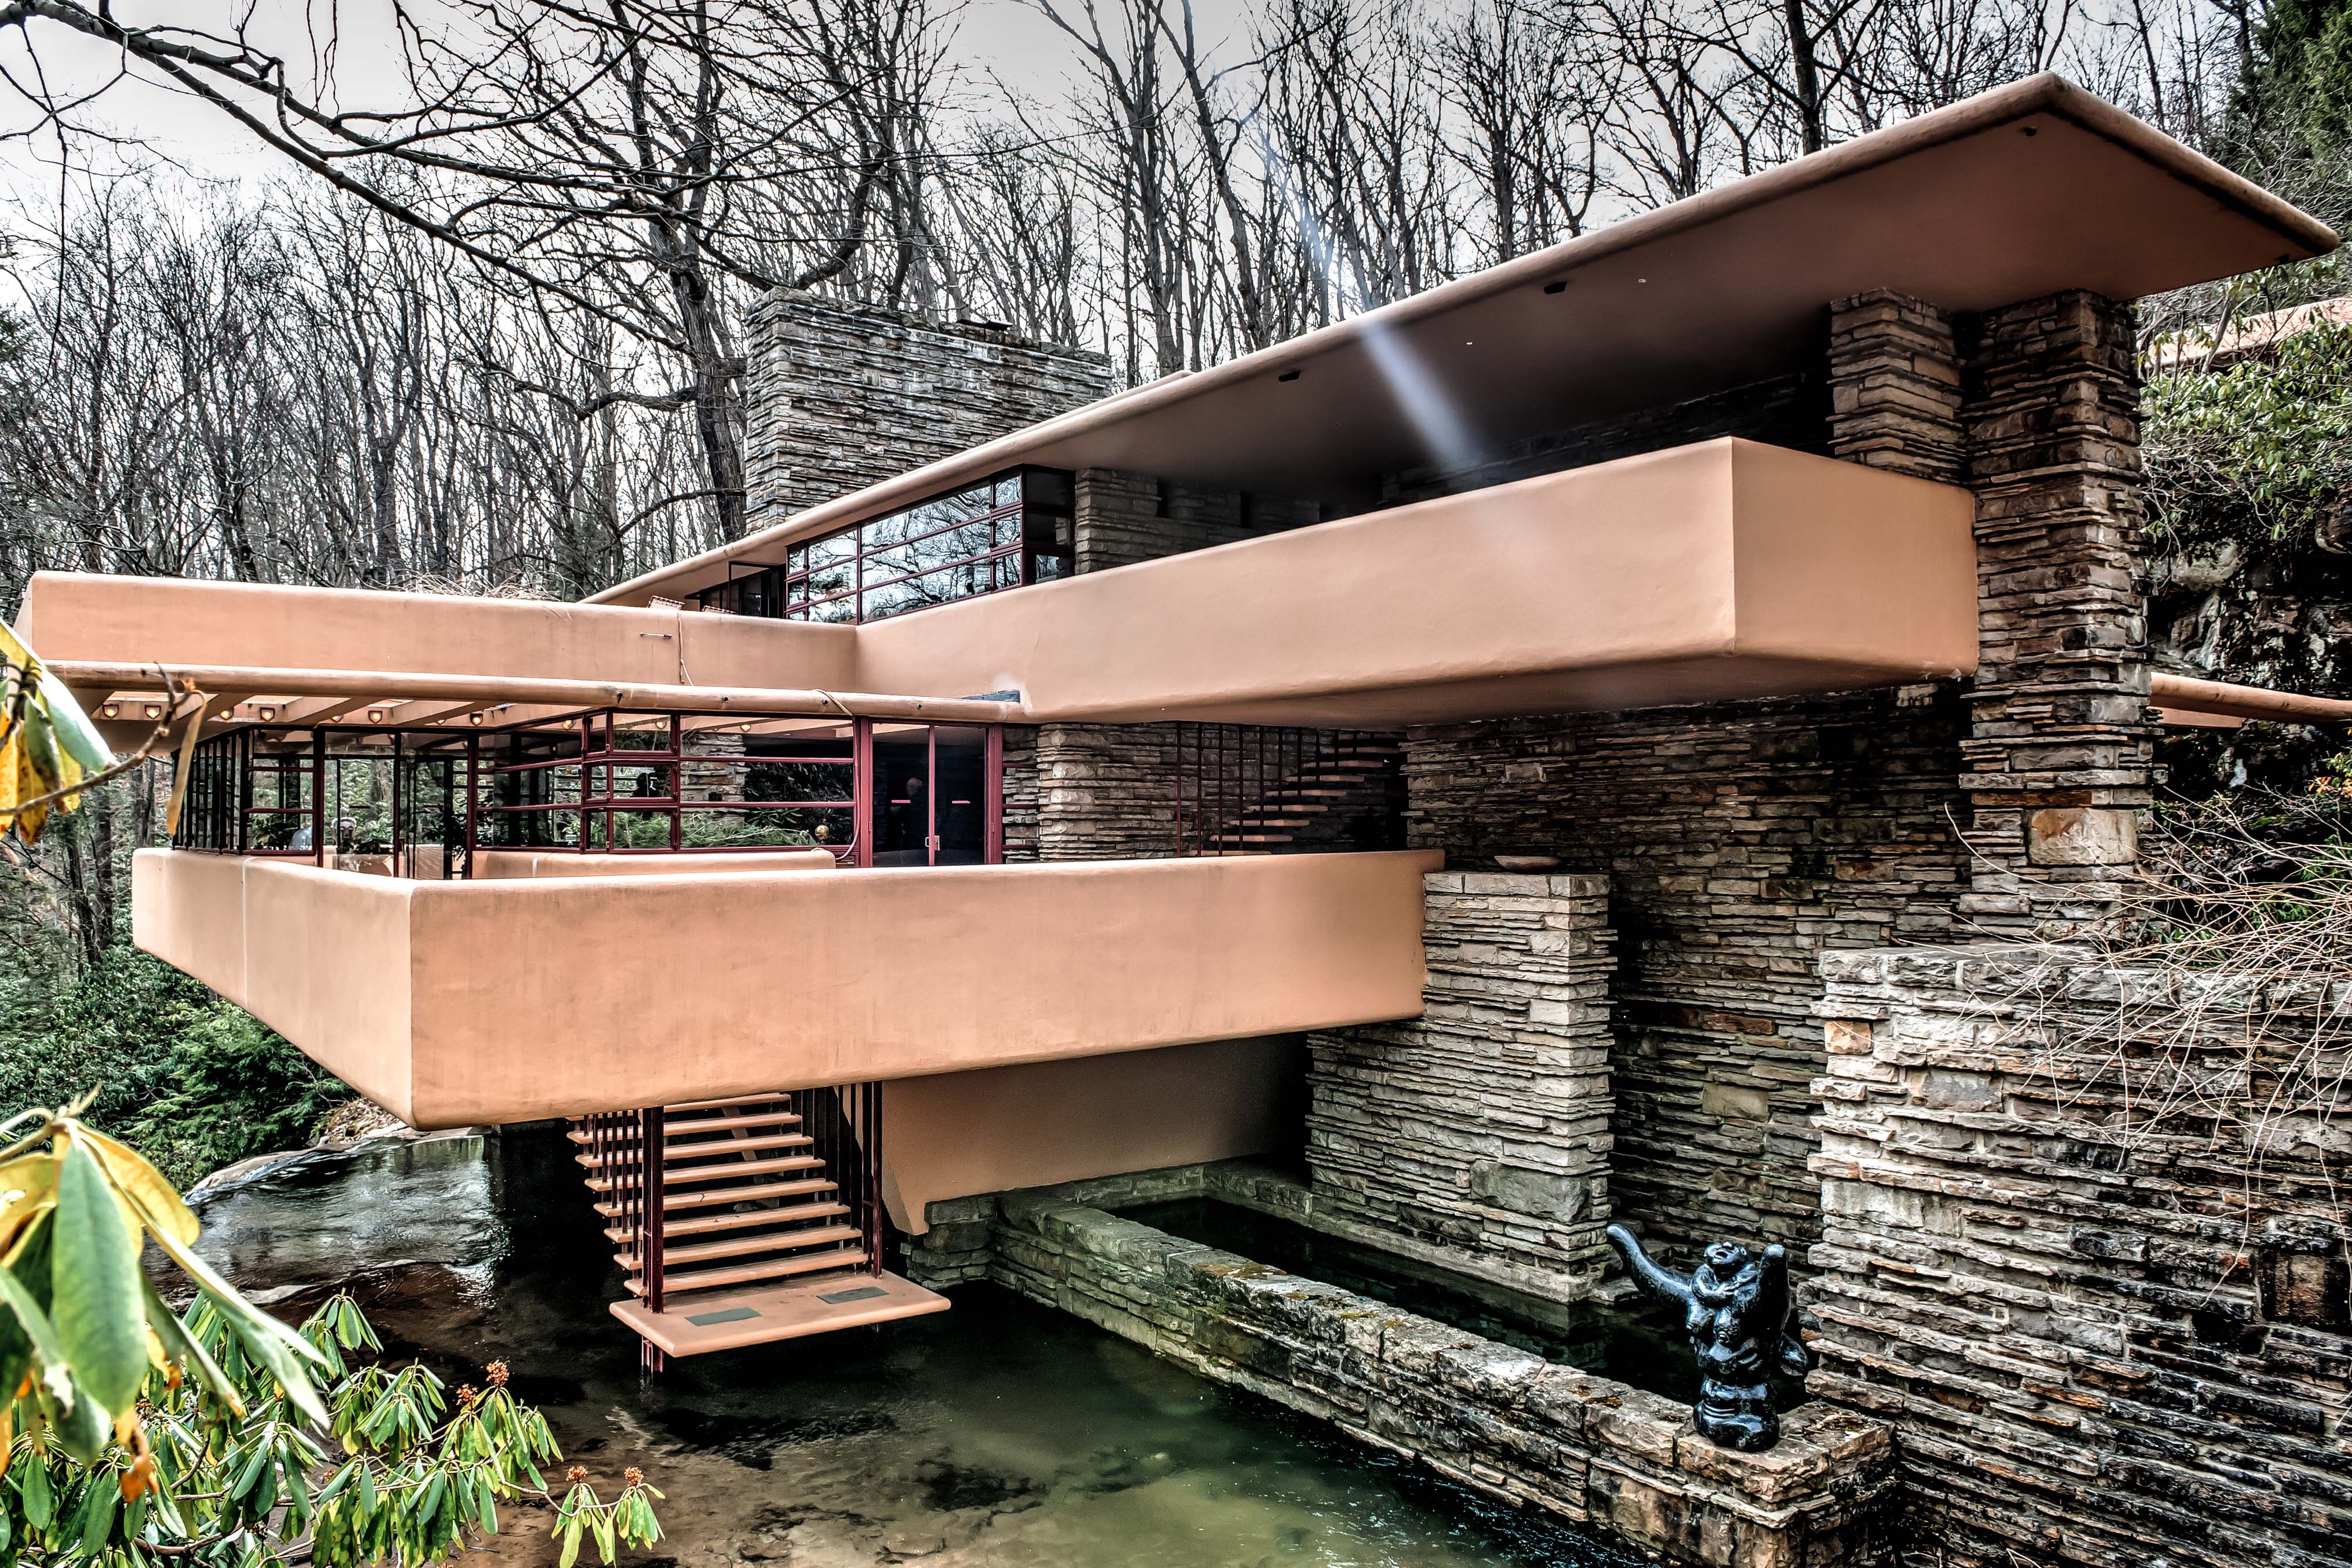 12 Facts About Frank Lloyd Wright's Fallingwater Mental Floss